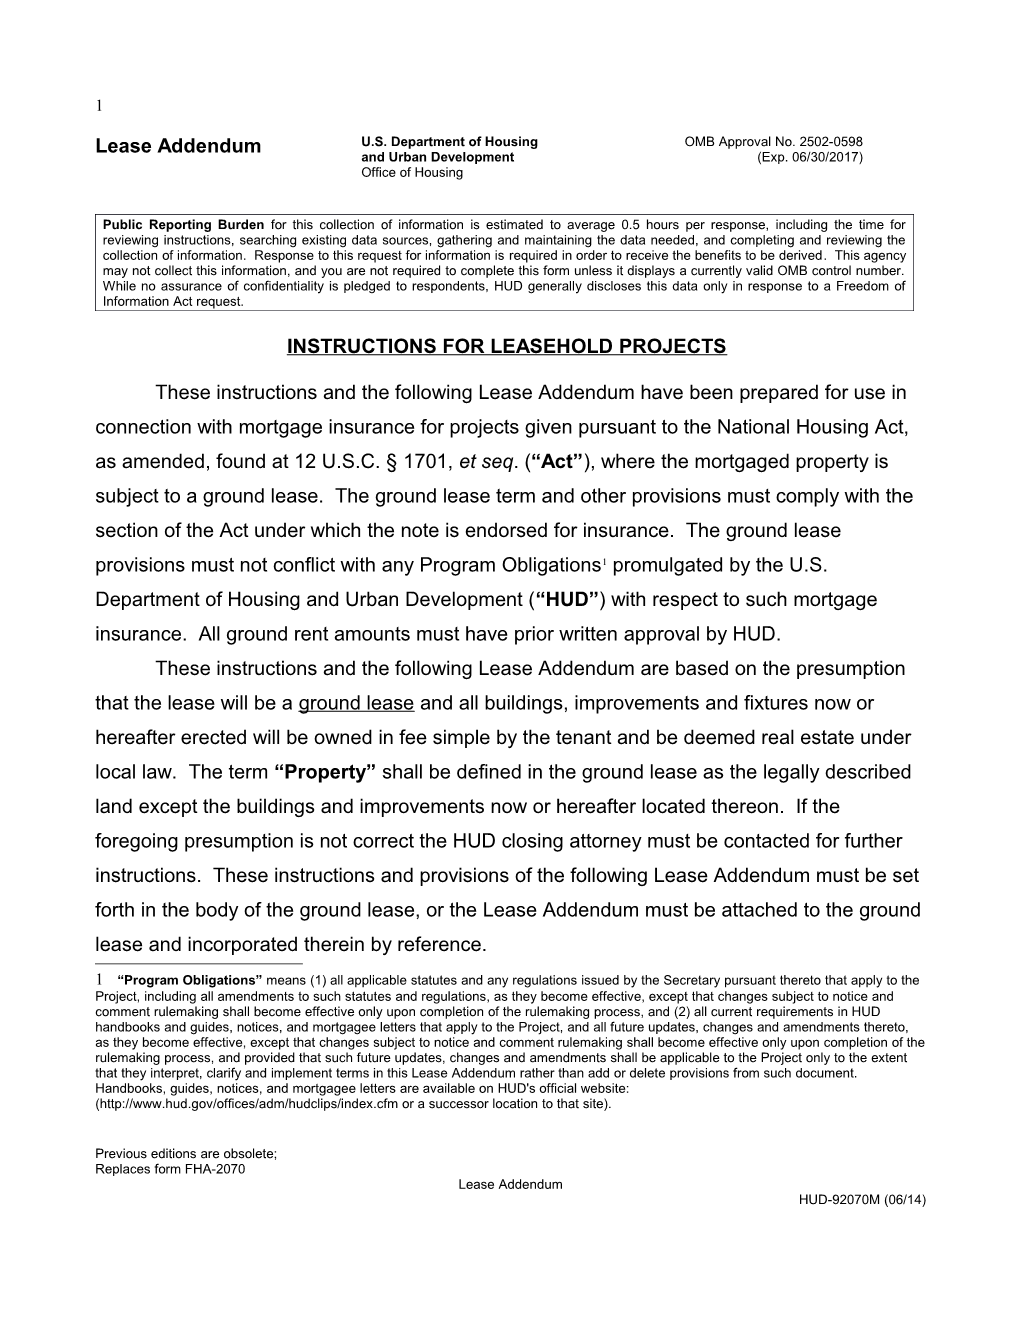 Instructions for Leasehold Projects